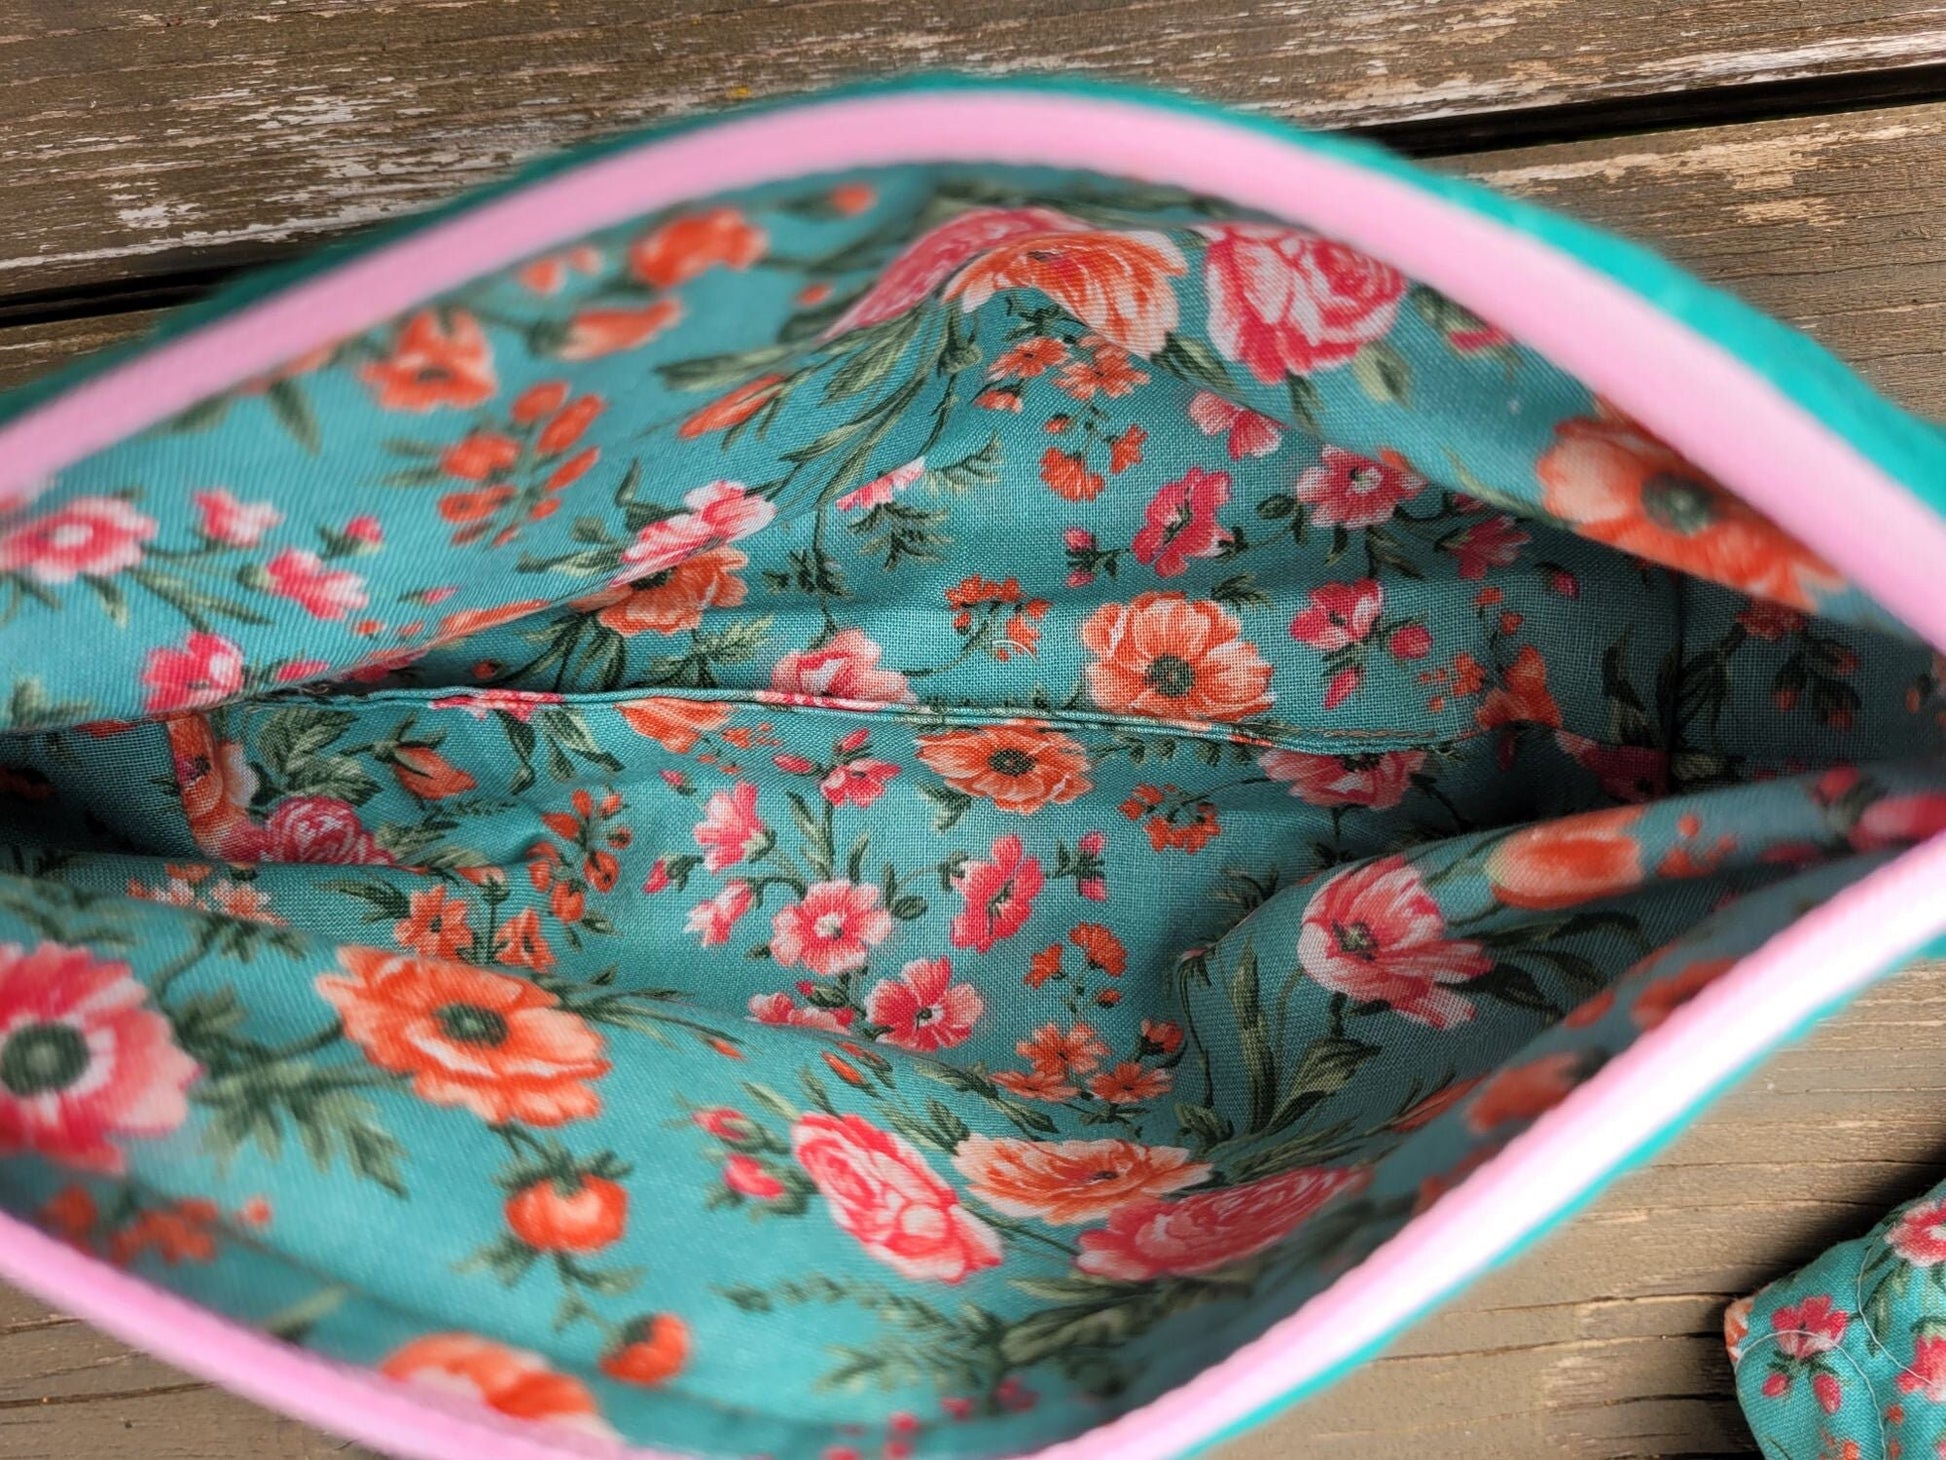 interior of teal pouch